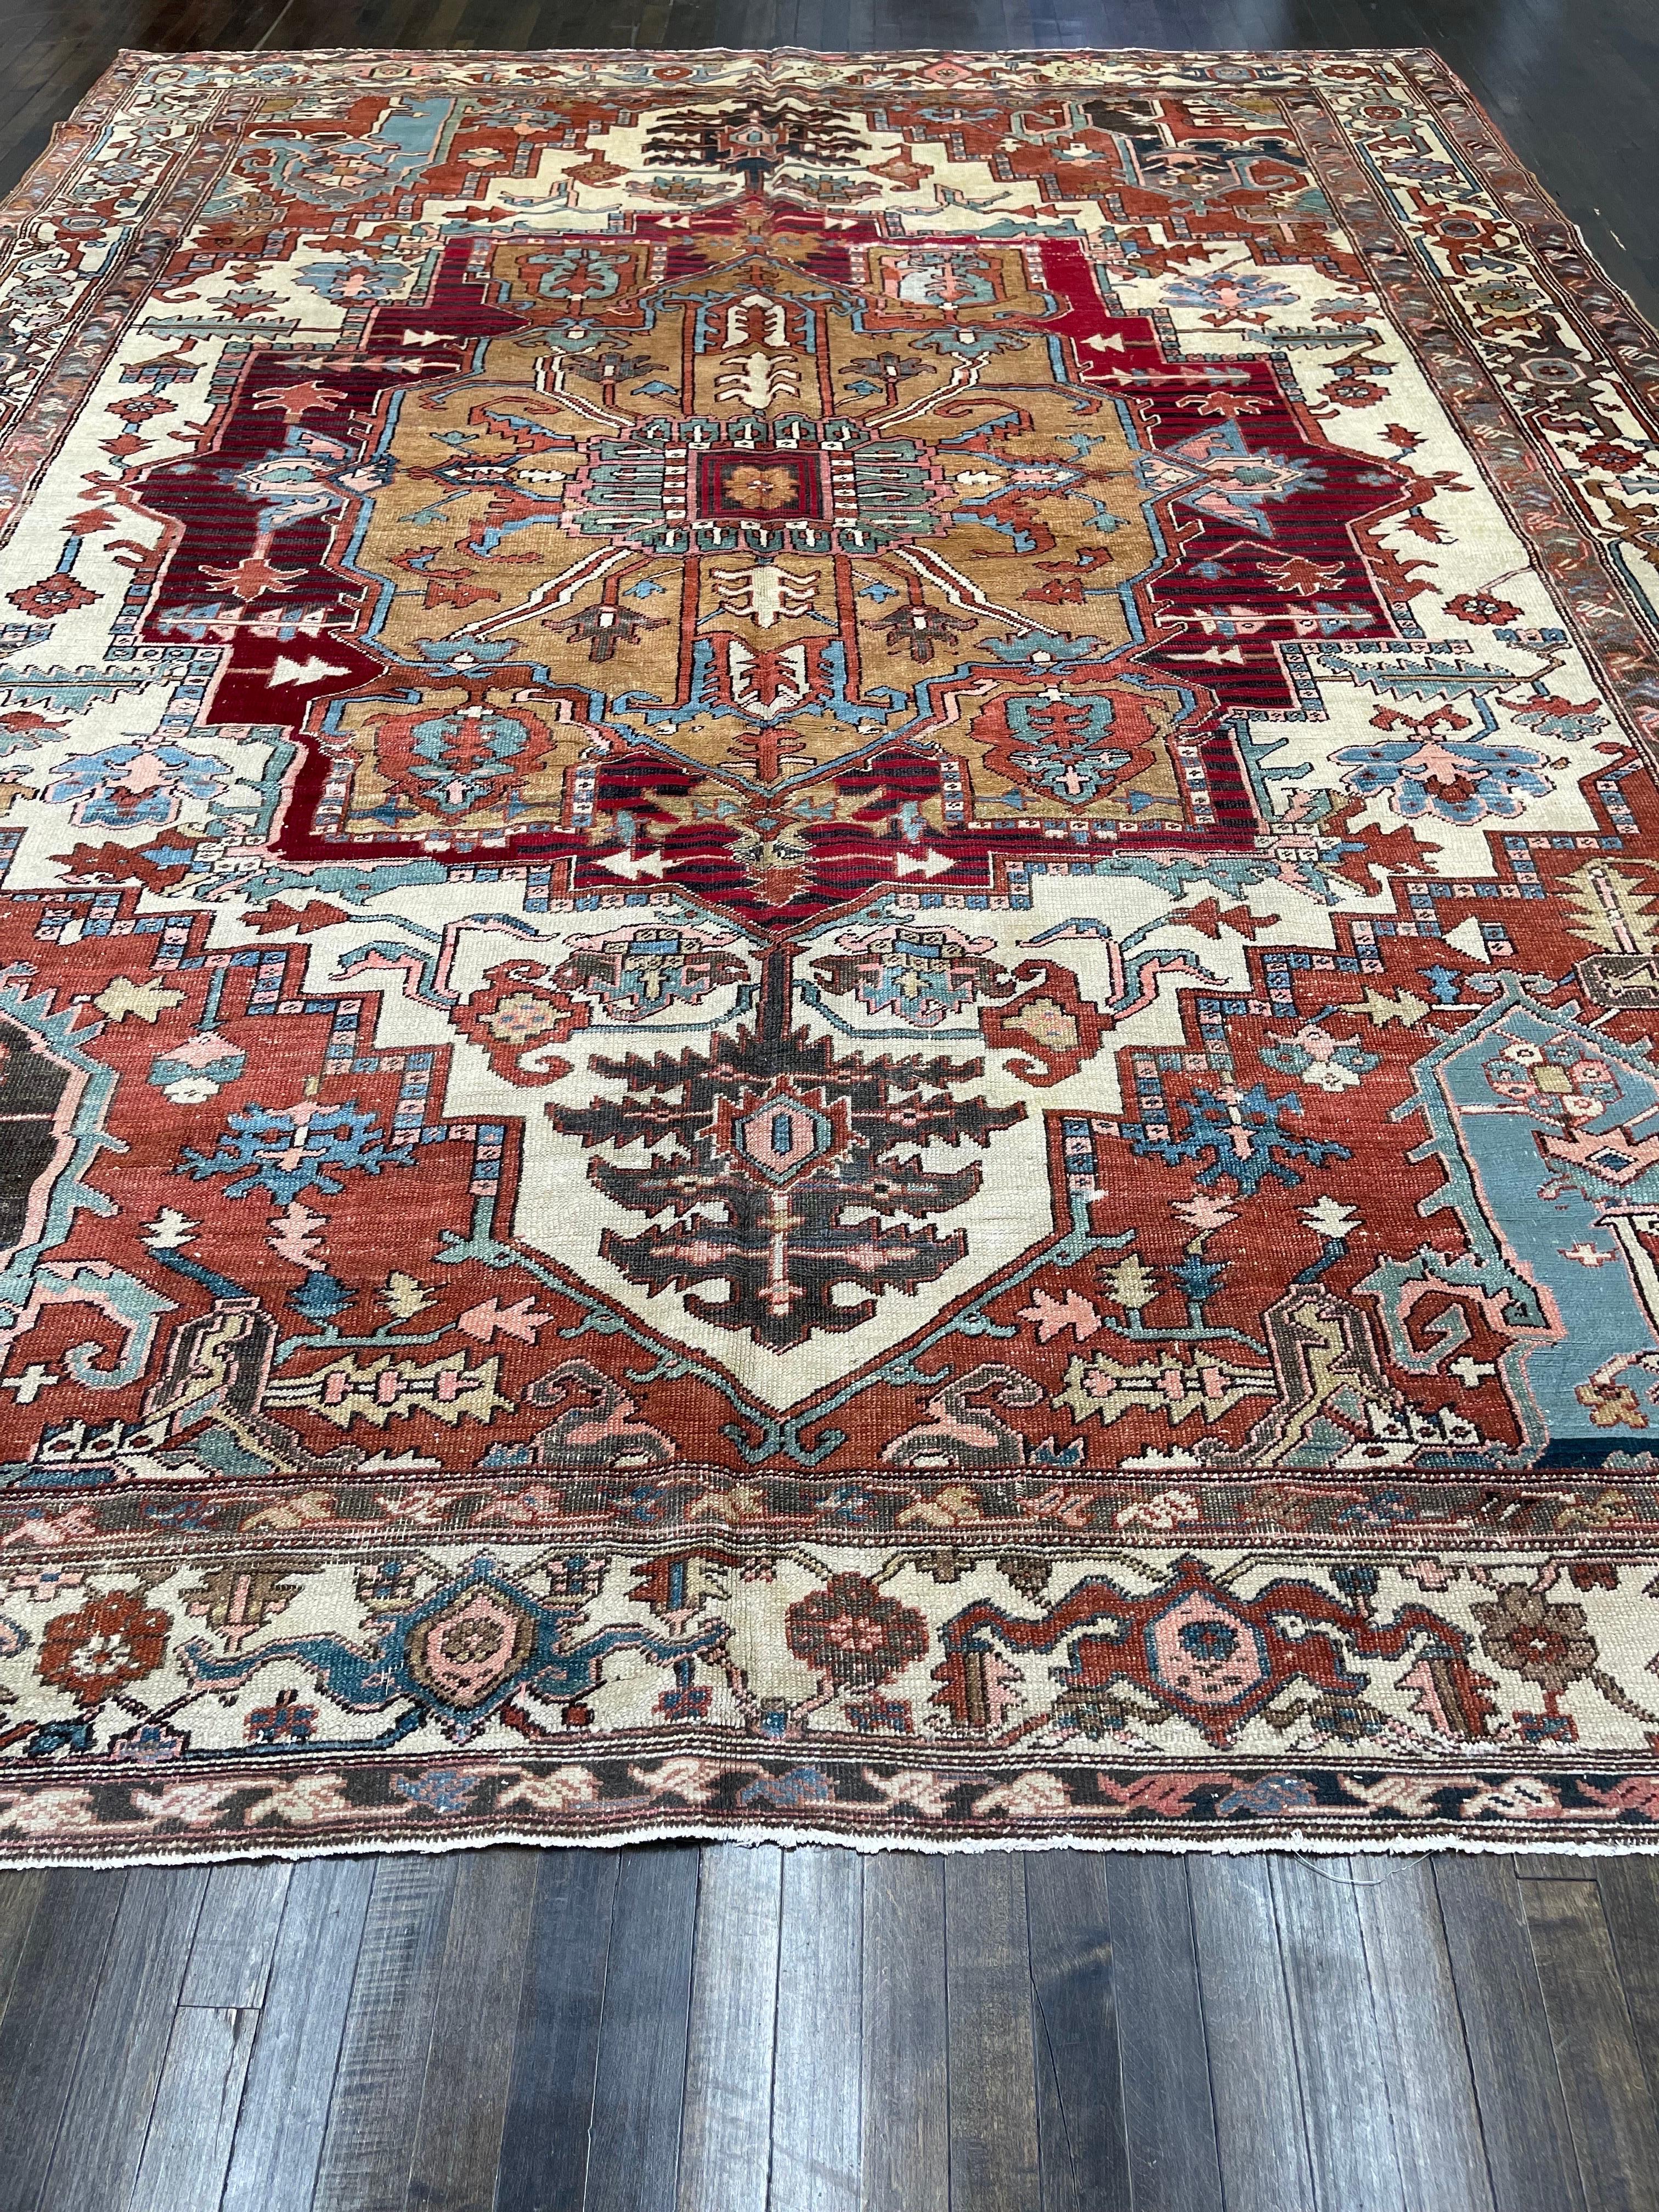 This rug is handmade in Serapi area located northwest of Iran. Heriz/Serapi carpets are woven on both a workshop and a cottage industry basis in hundreds of villages throughout the area. Designs have remained unchanged for thousands of years: a huge